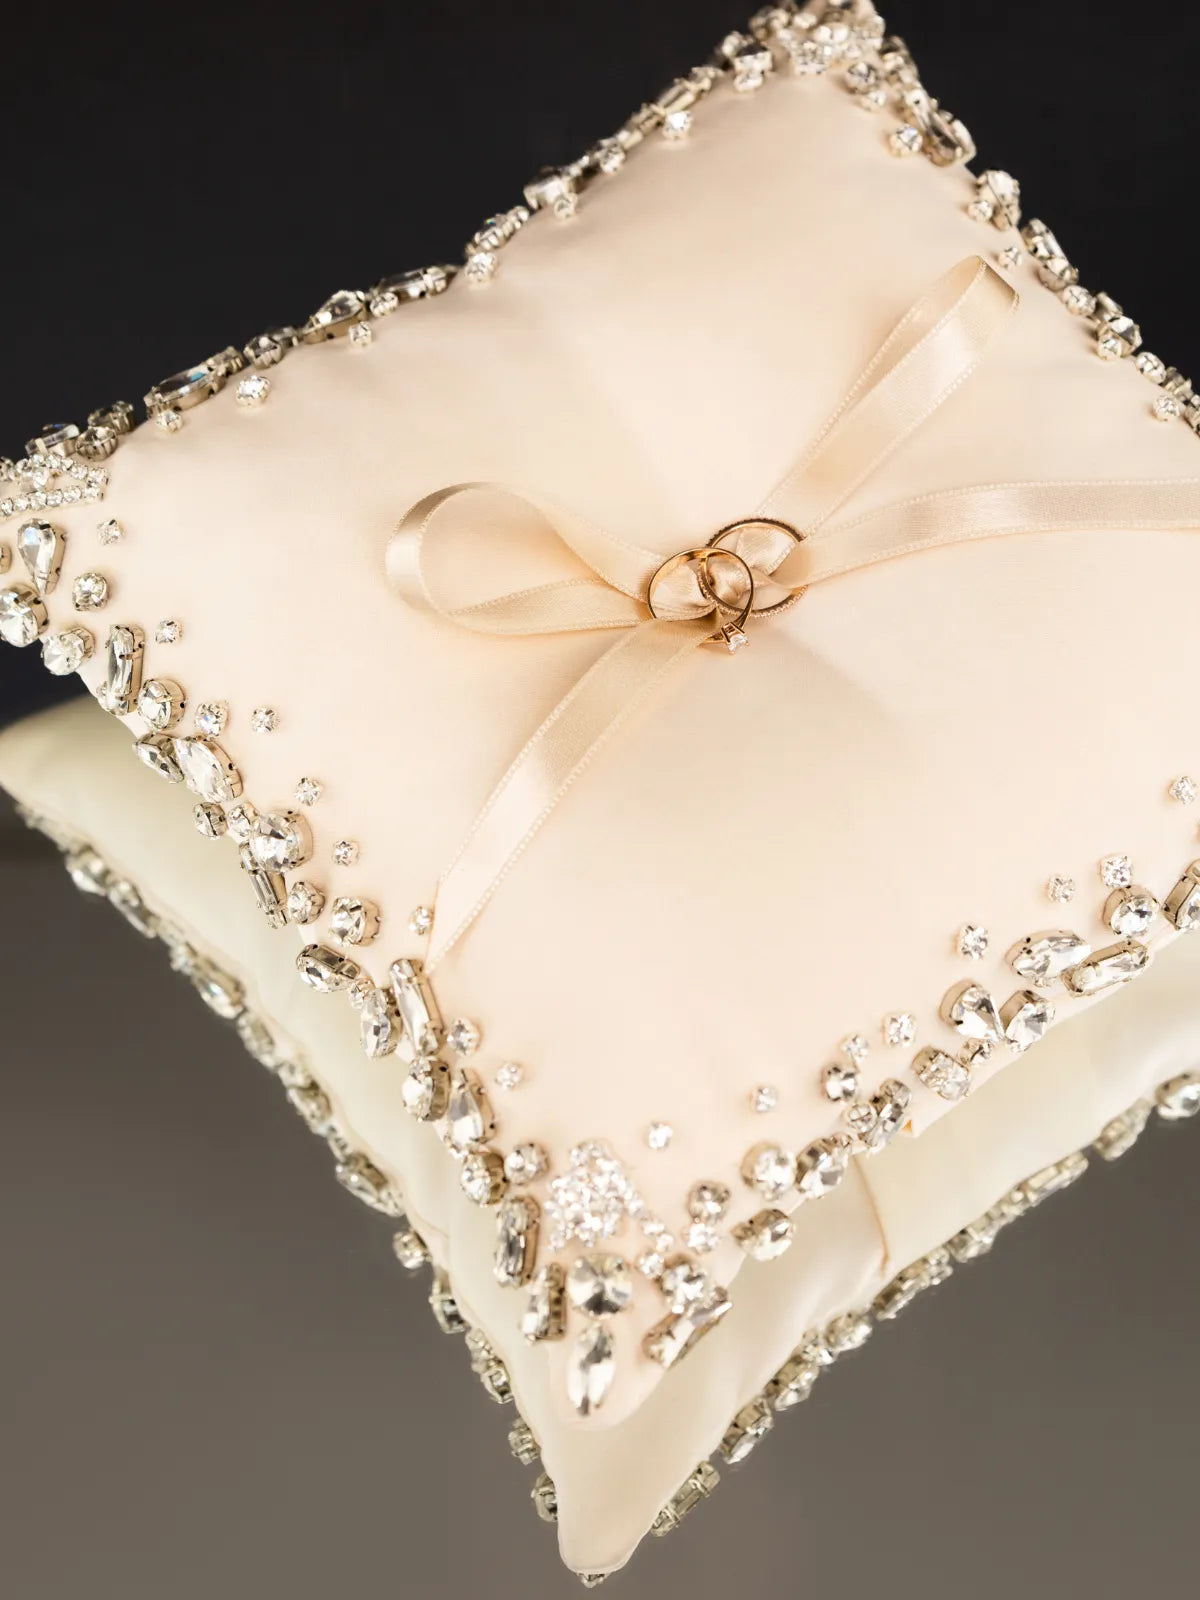 Wedding Pillow For Rings In Ivory